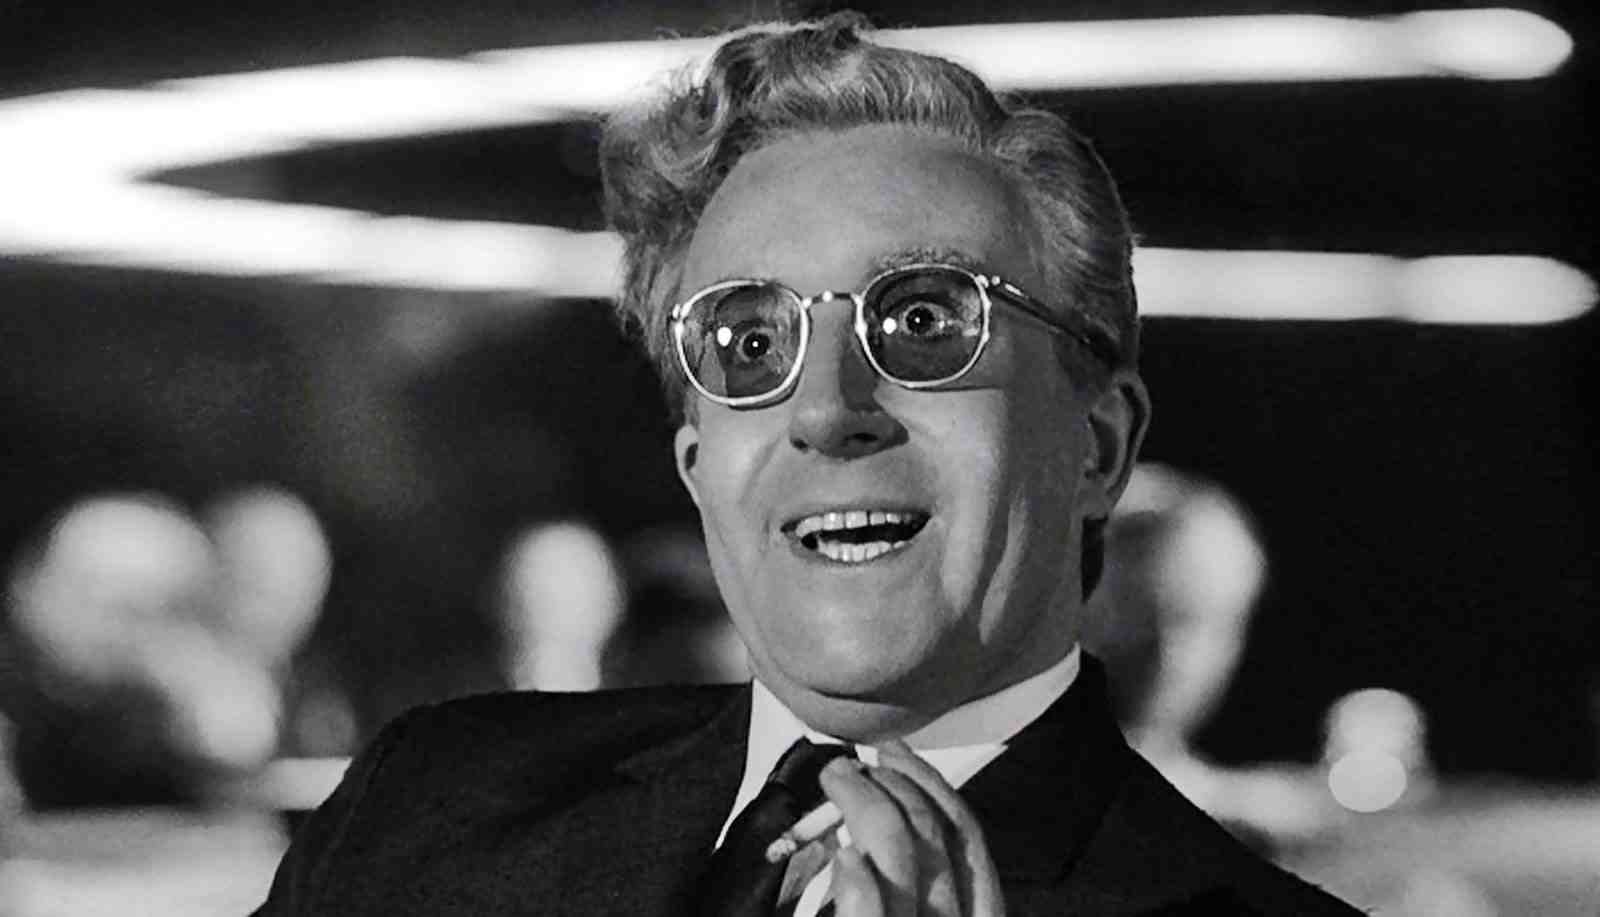 Dr. Strangelove or How I Learned to Stop Worrying and Love the Bomb